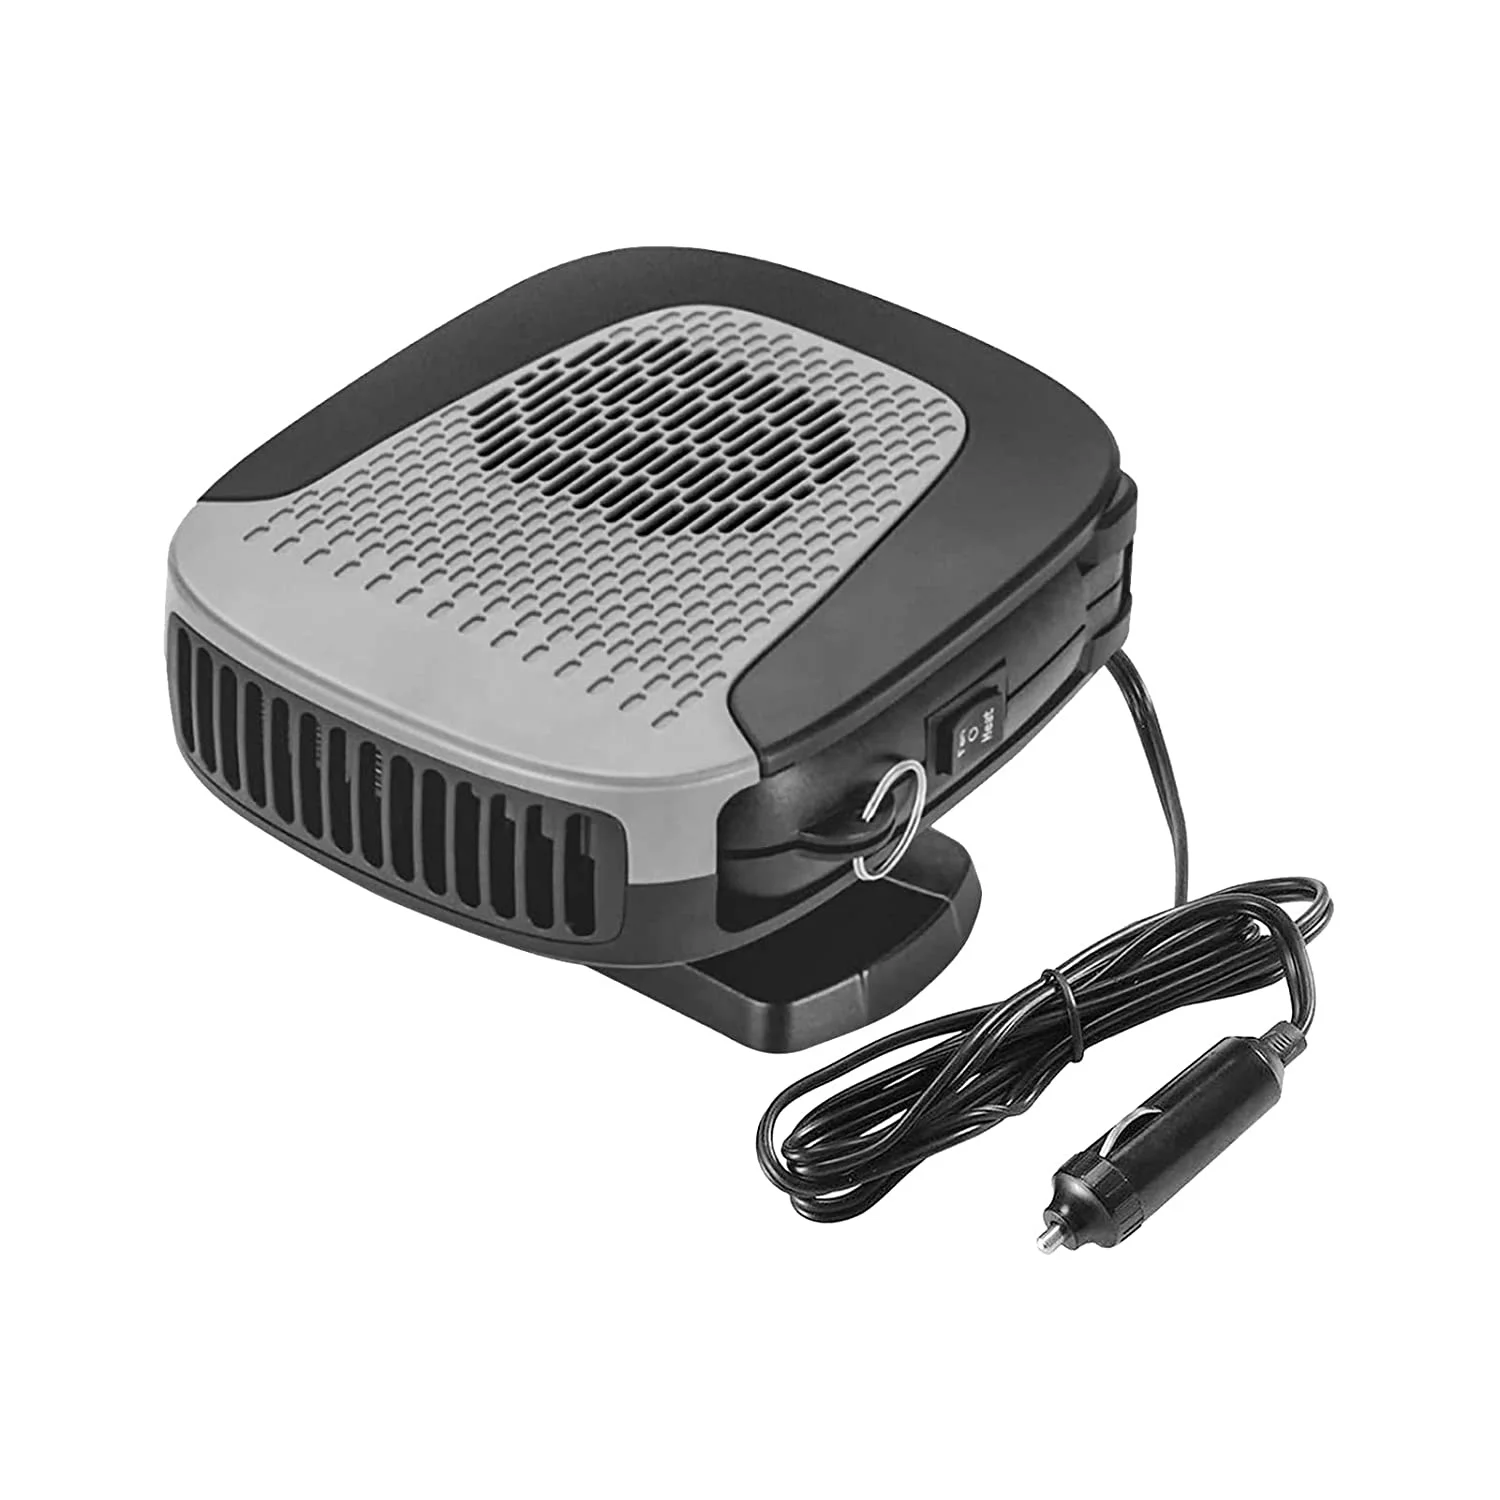 12V Car Heater Mini Portable Electric Car Heater,150W Quiet Plug in Ceramic Instant Heating Auto Window Demister Heater Fan Multifunction Car Auto Vehicle Heating Cooling Fan 